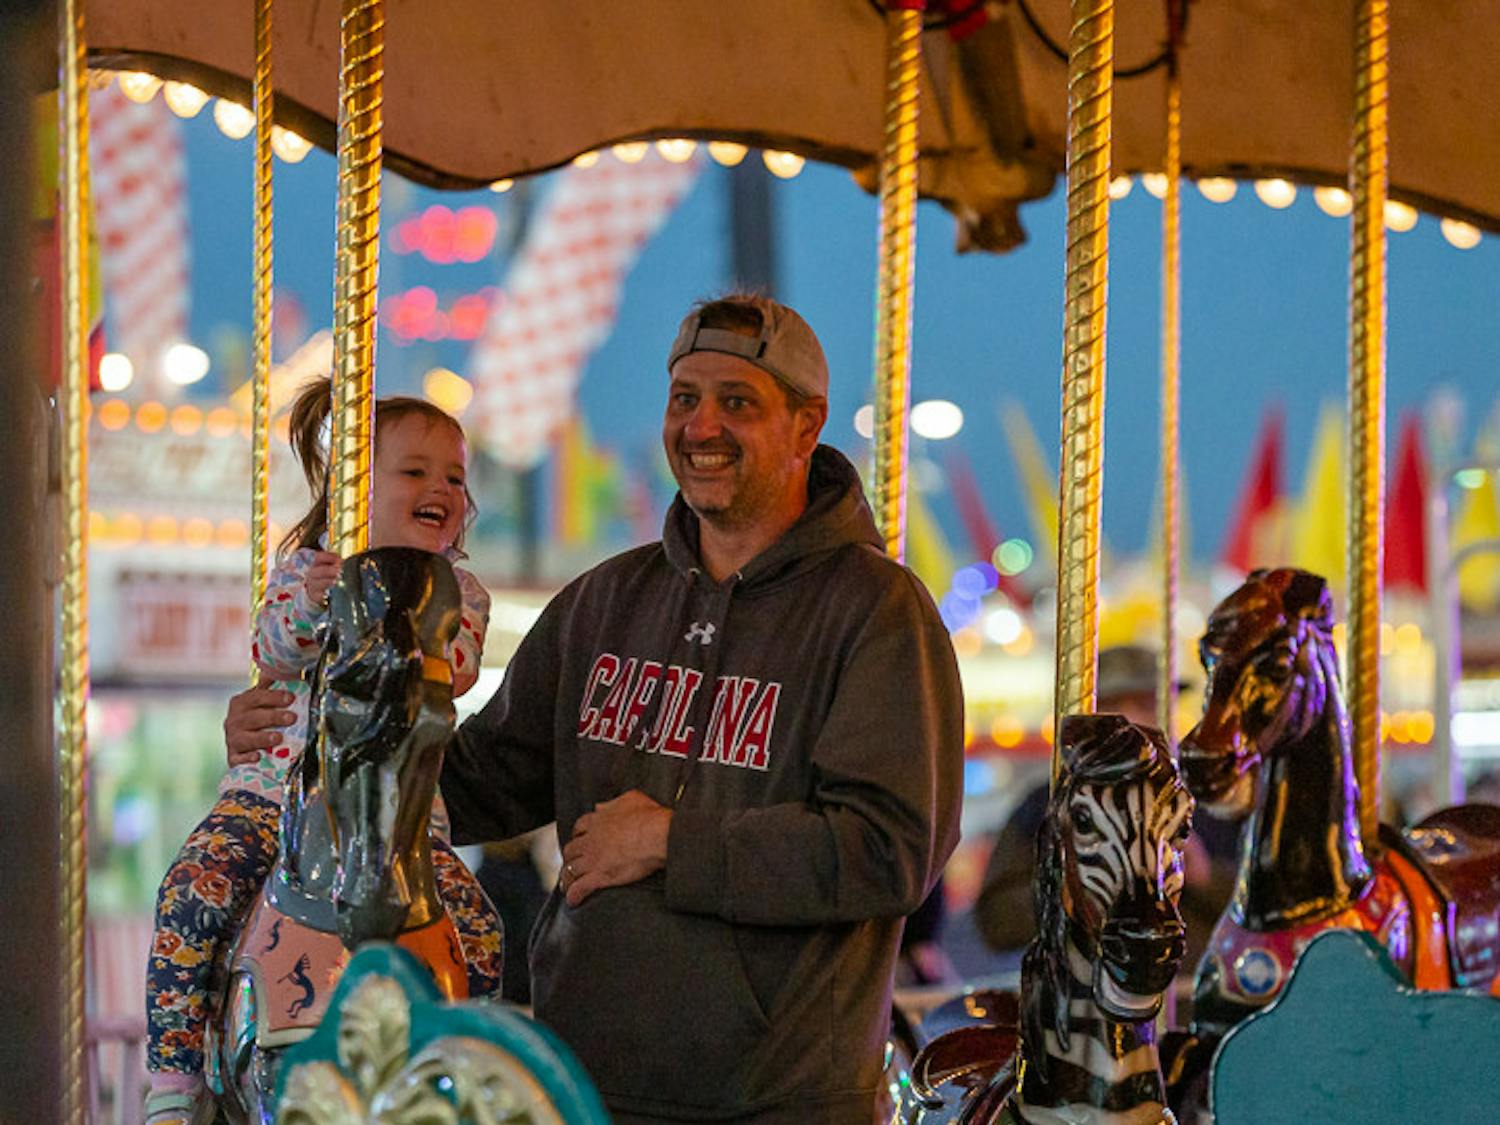 Columbia residents 2-year-old Abby Malizia (on left) and her father, 40-year-old Kevin Malizia (on right) ride a merry-go-round at the South Carolina State Fair on Oct.18, 2022. The S.C. State Fair features a variety of both high-energy and relaxing rides for fair attendees of all ages.